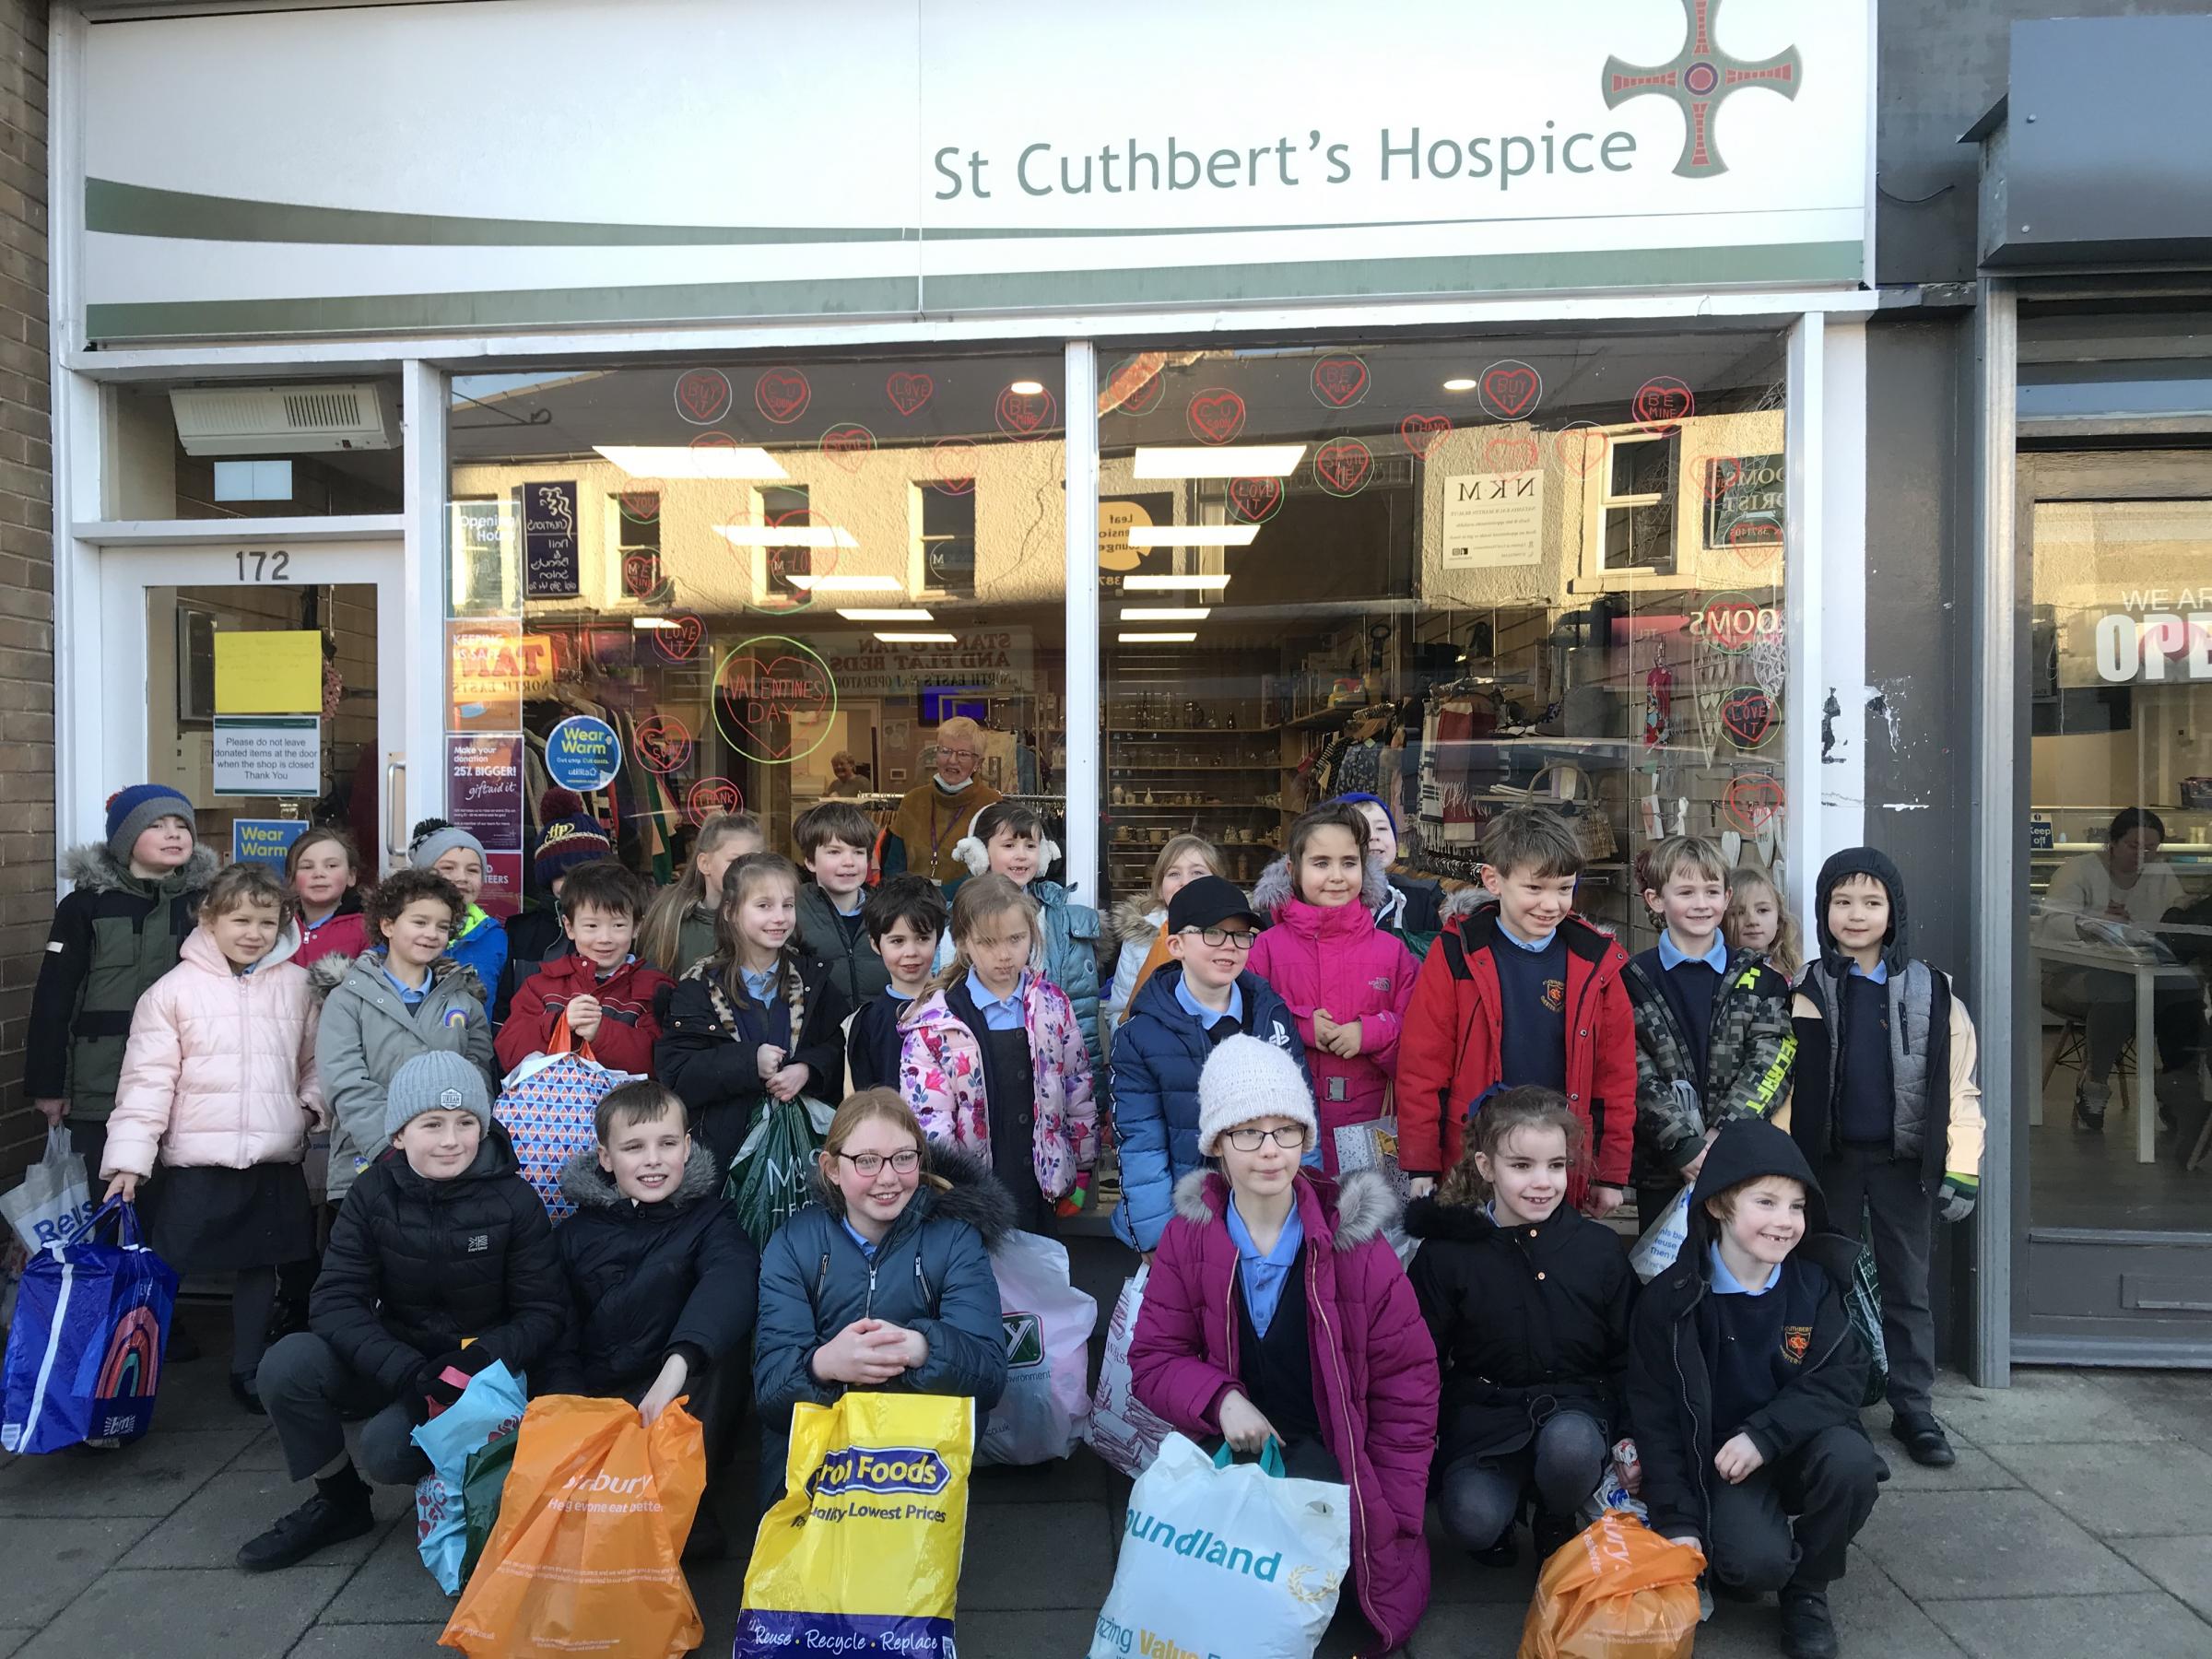 Chester-le-Street pupils help environment and St Cuthberts Hospice